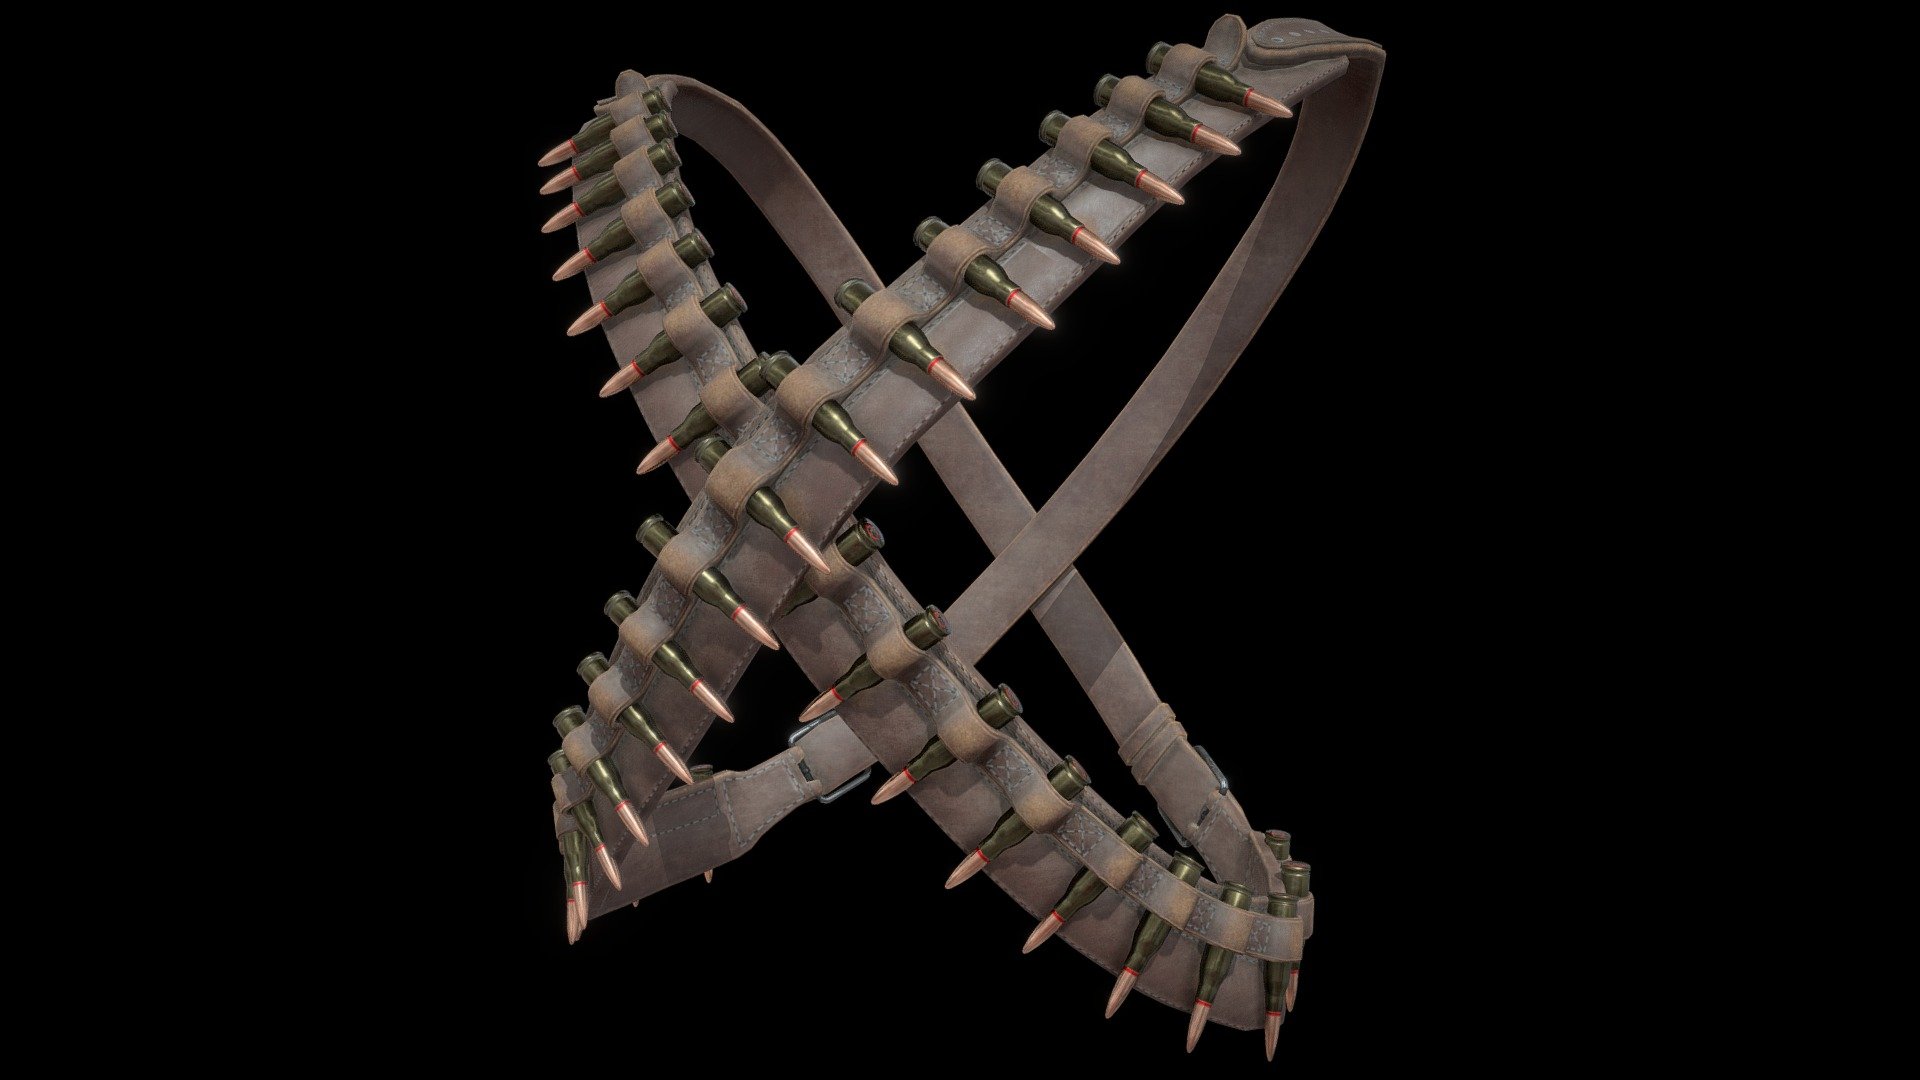 Commissioned job for cyberfrogsNFT project - Bandolier - 3D model by UnrealAssets.io (@metacaptain) 3d model